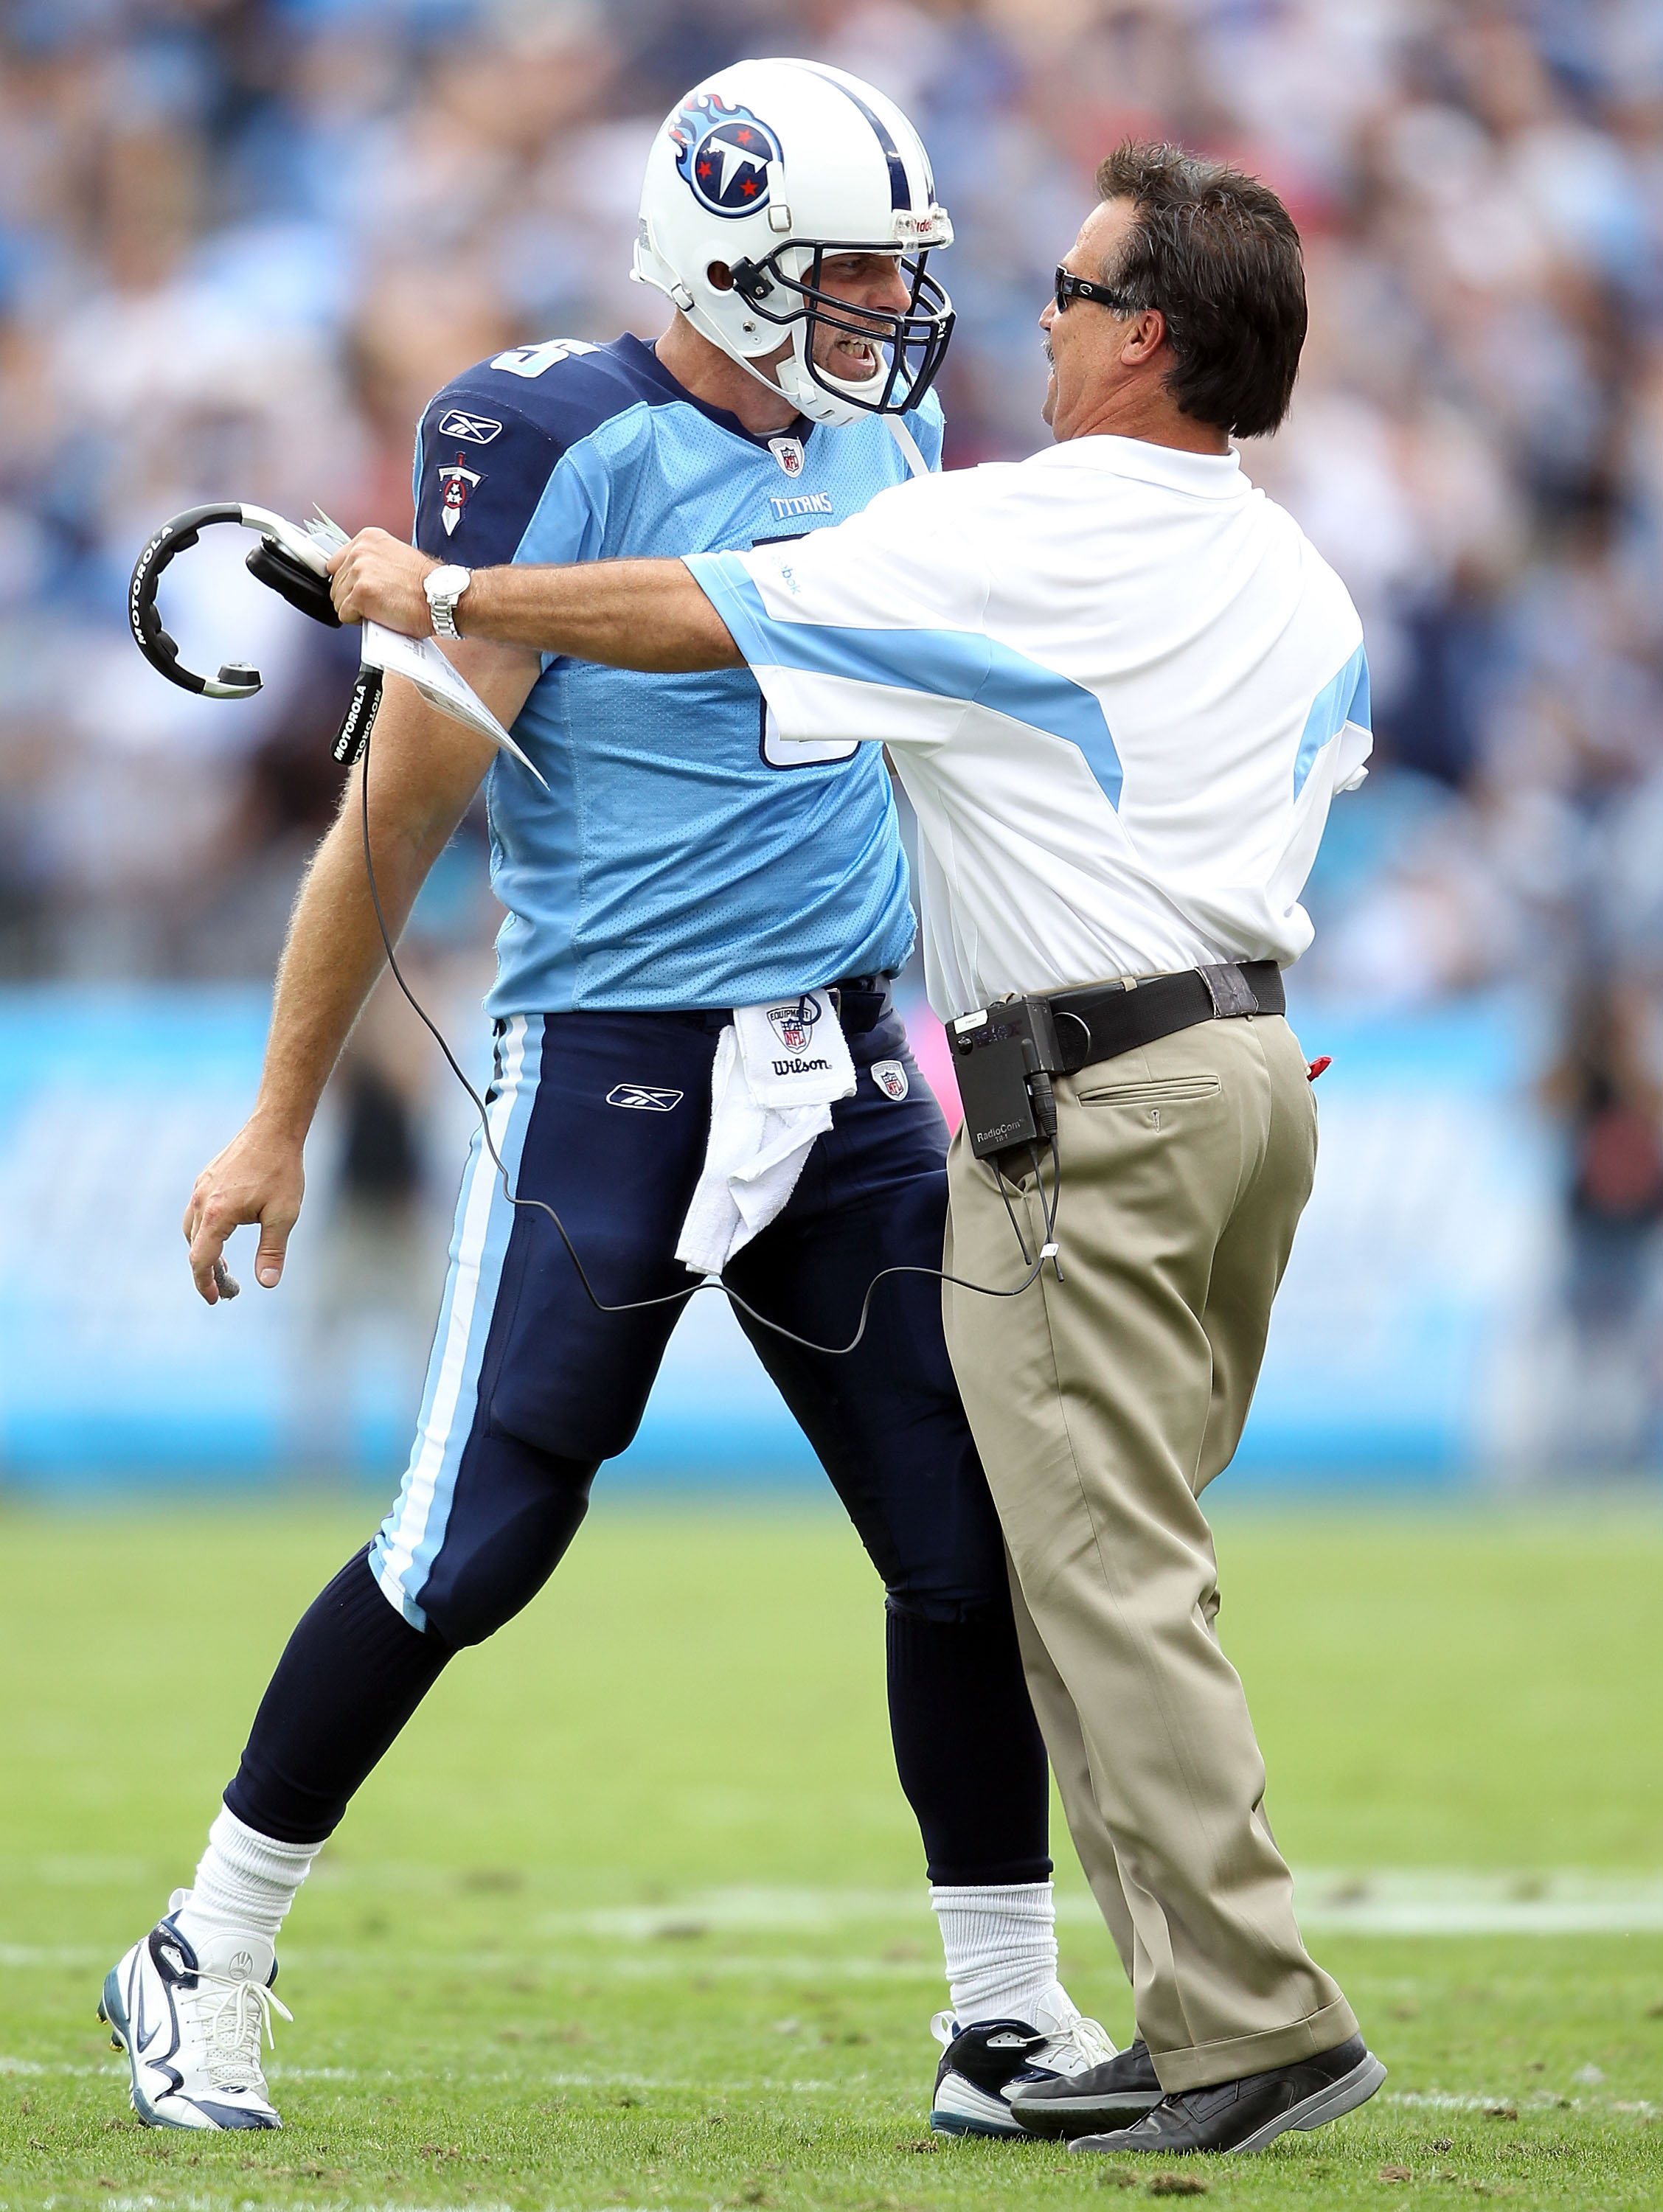 NASHVILLE, TN - OCTOBER 24:  Kerry Collins #5 of the Tennessee Titans celebrates with Titans Head Coach Jeff Fisher after Collins threw a touchdown pass in the fourth quarter during the NFL game against the Philadelphia Eagles at LP Field on October 24, 2